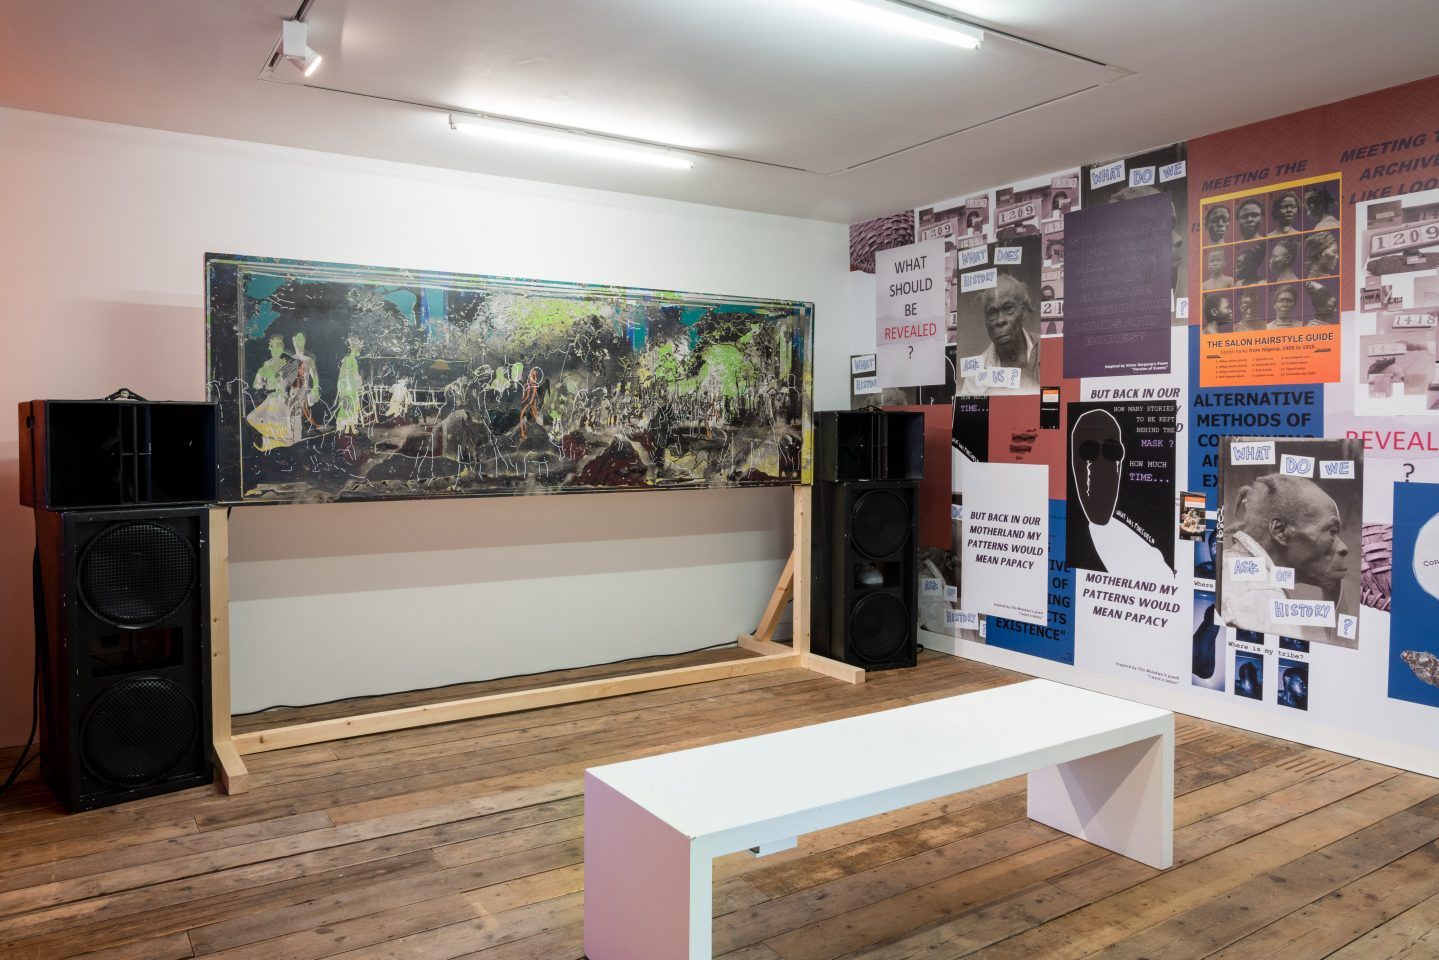 A series of posters on the right hand wall, a collage painting on a wooden frame and two huge speakers on either side